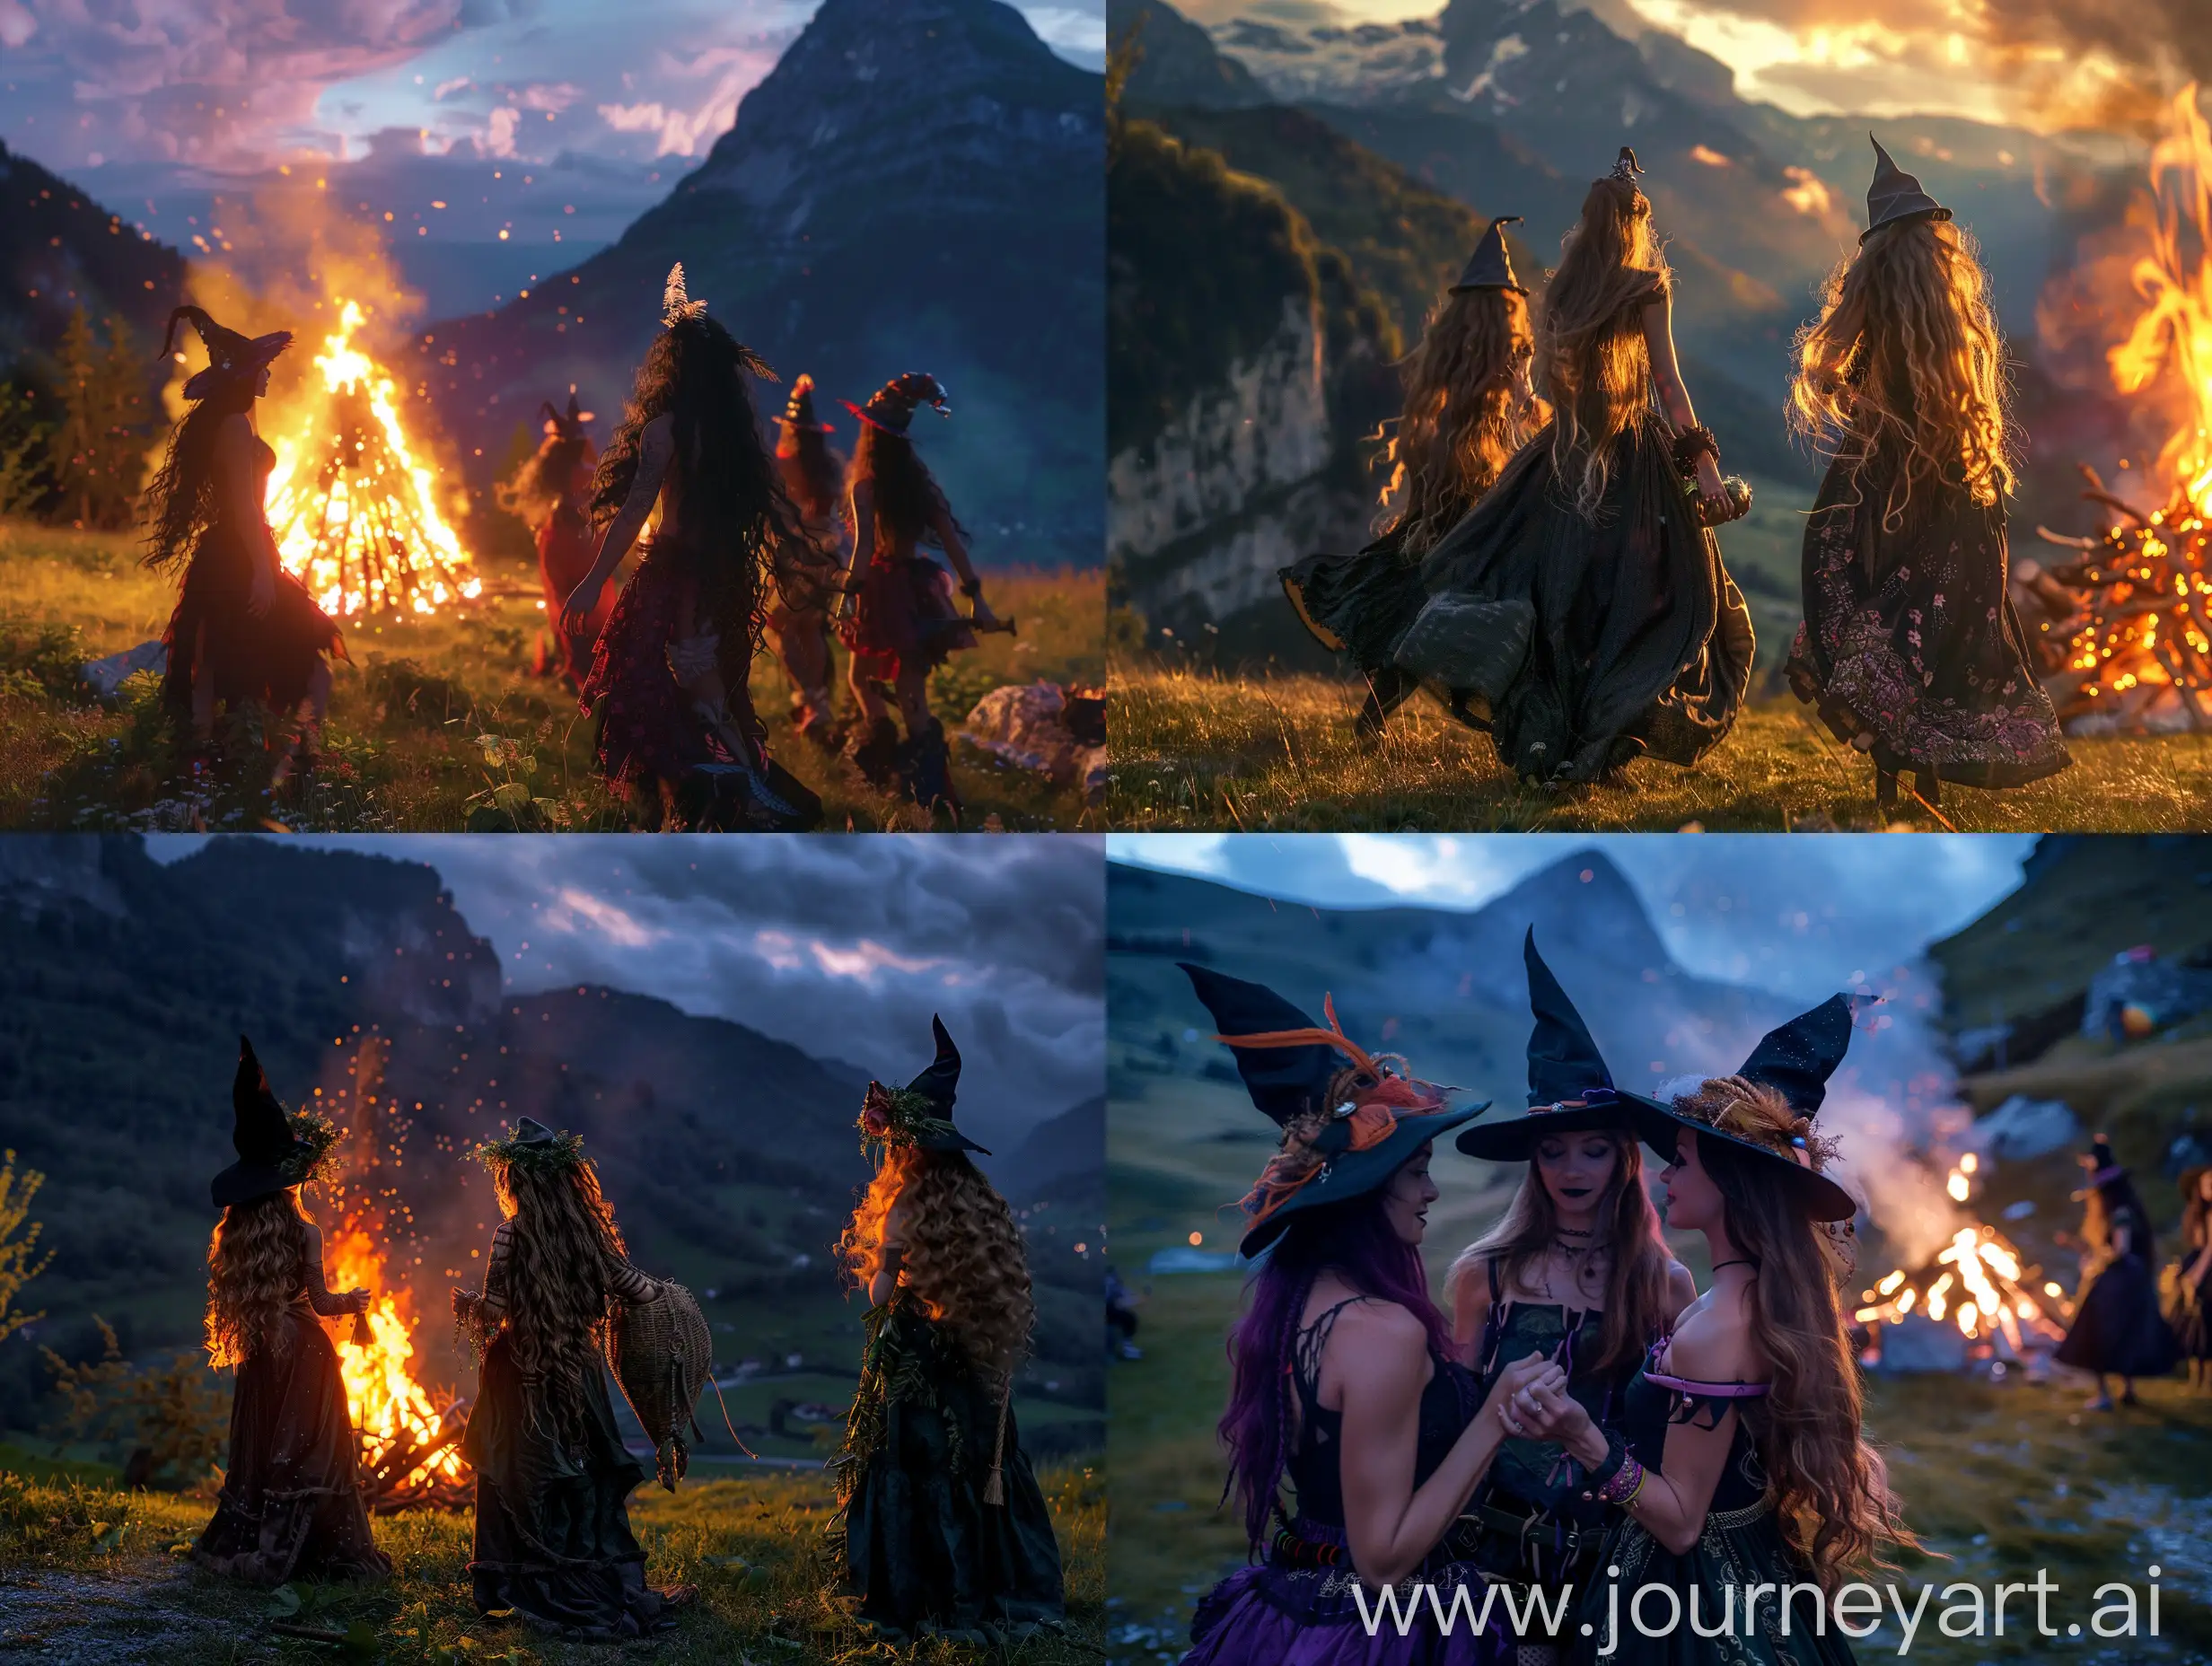 Beltain-Celebration-Witches-Dancing-Around-a-Bonfire-in-a-Mountain-Valley